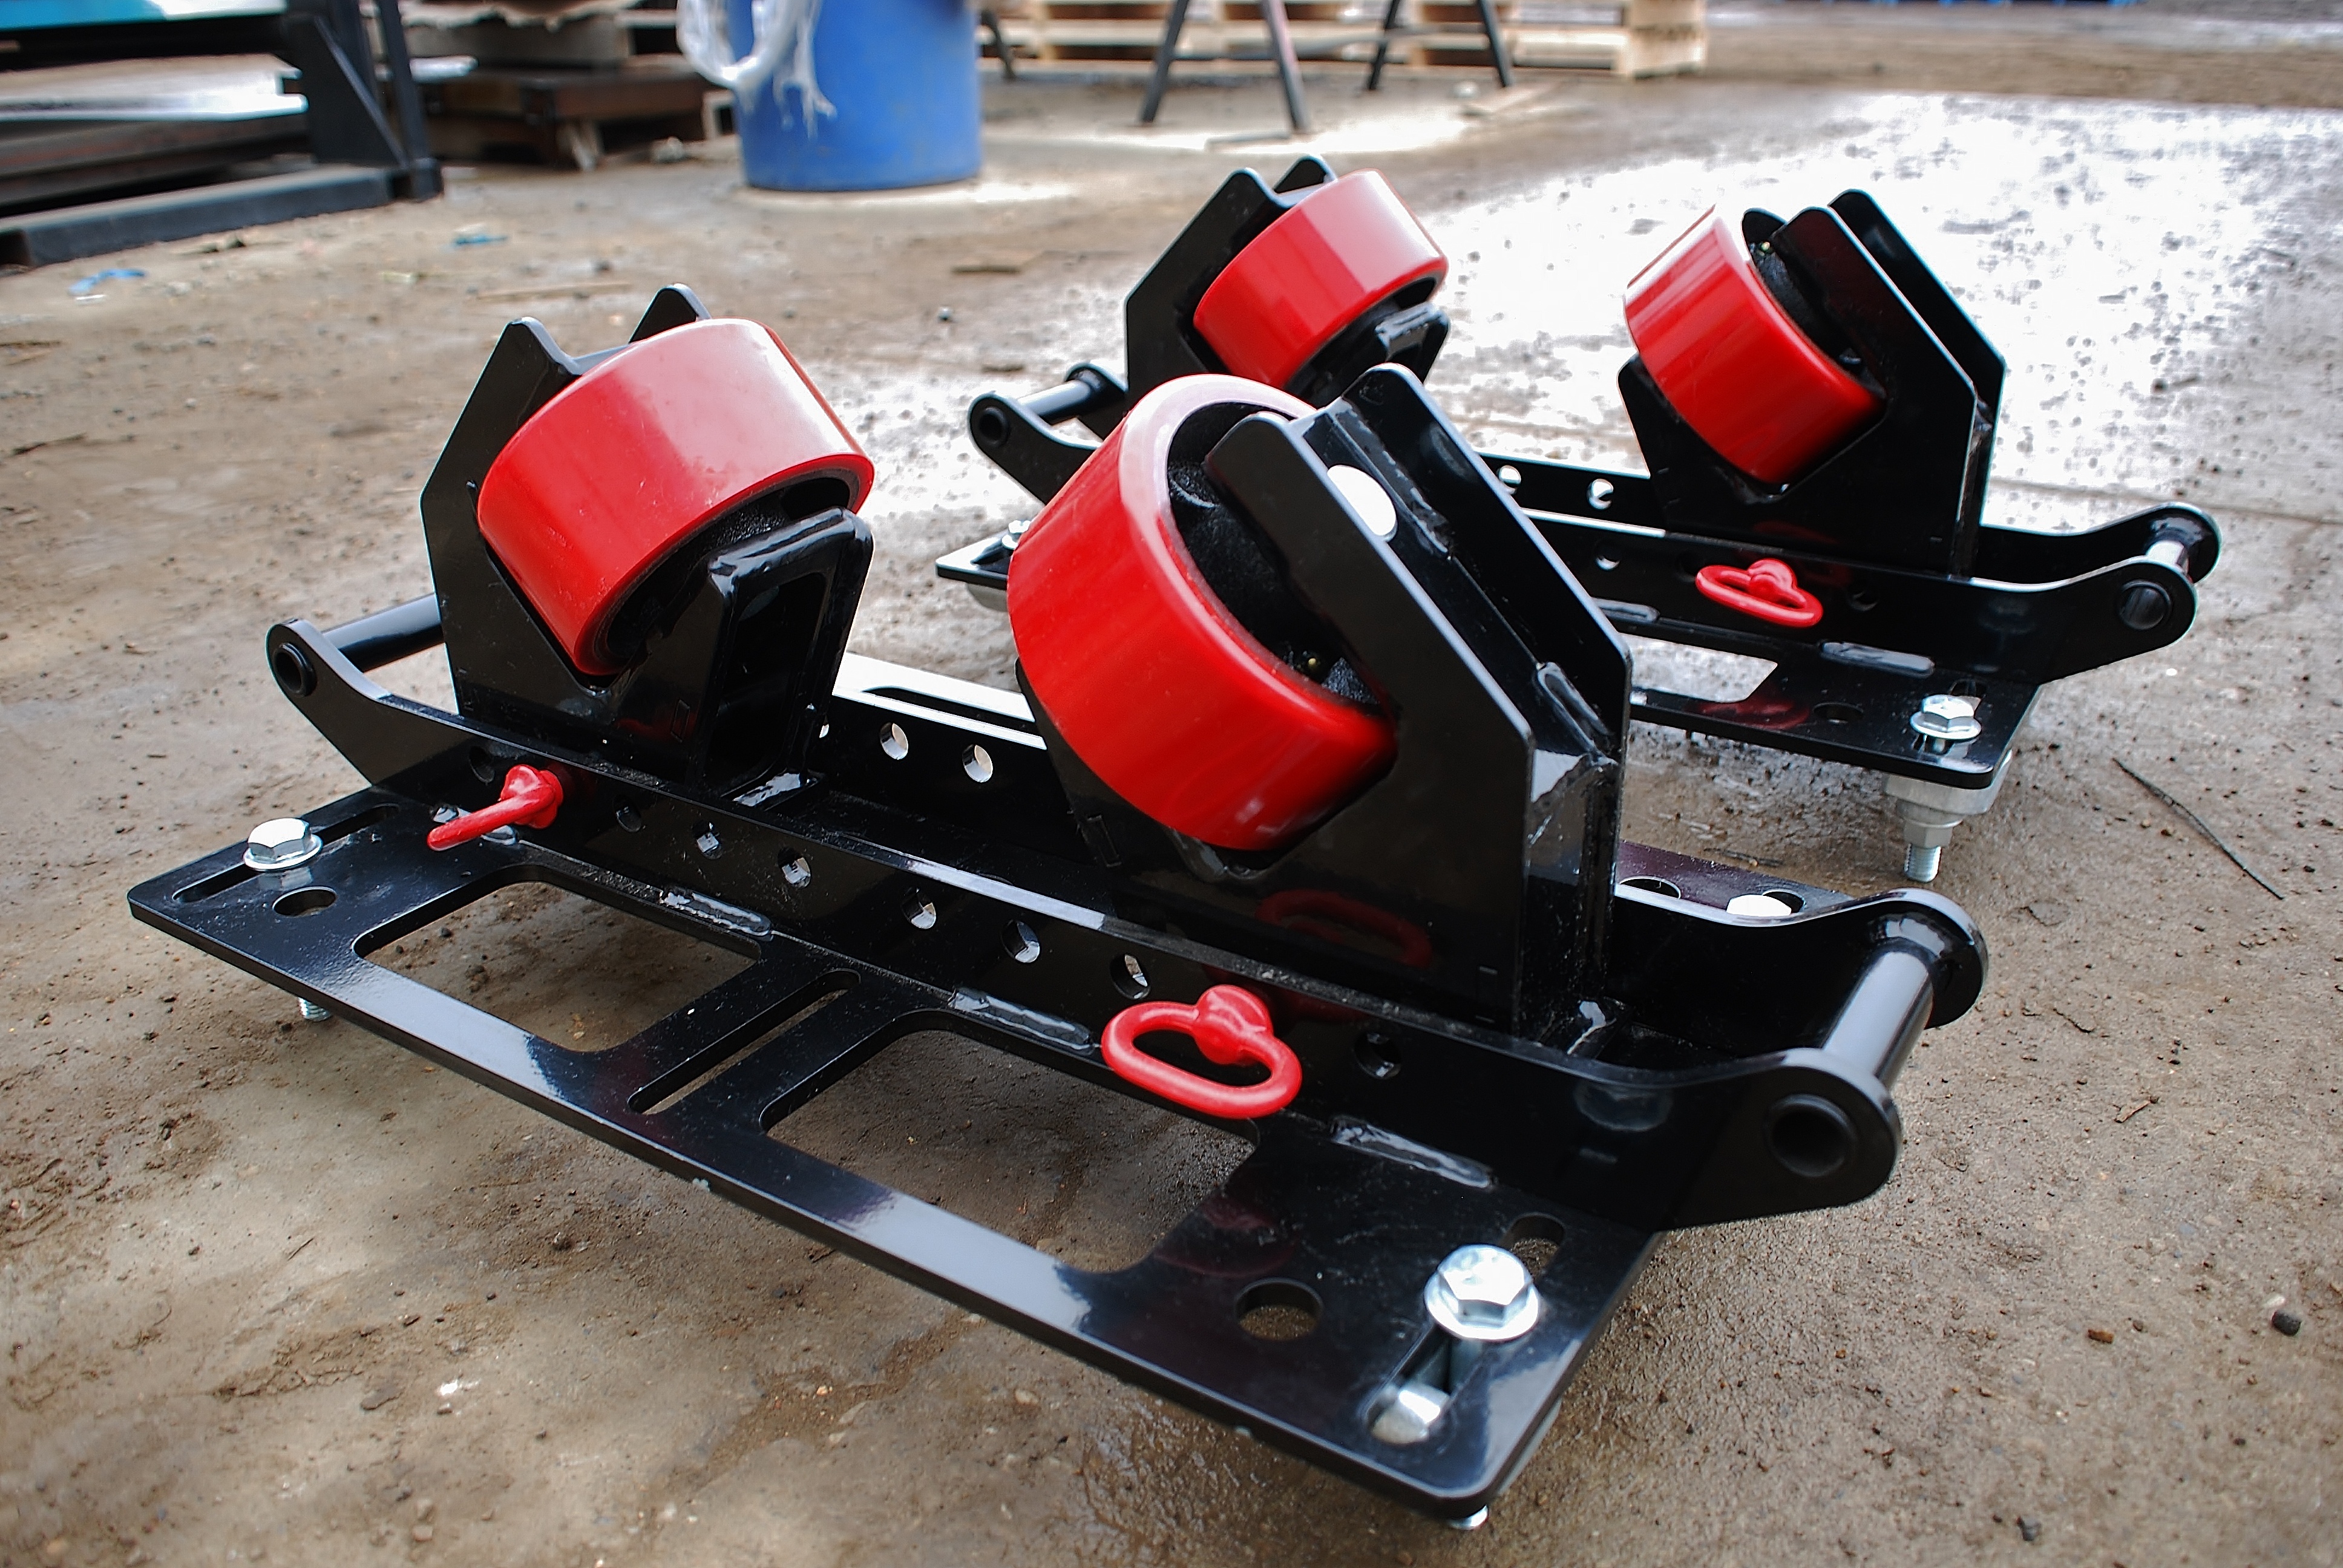 2-ton beam clamp rigging rollers for pipe rack installations